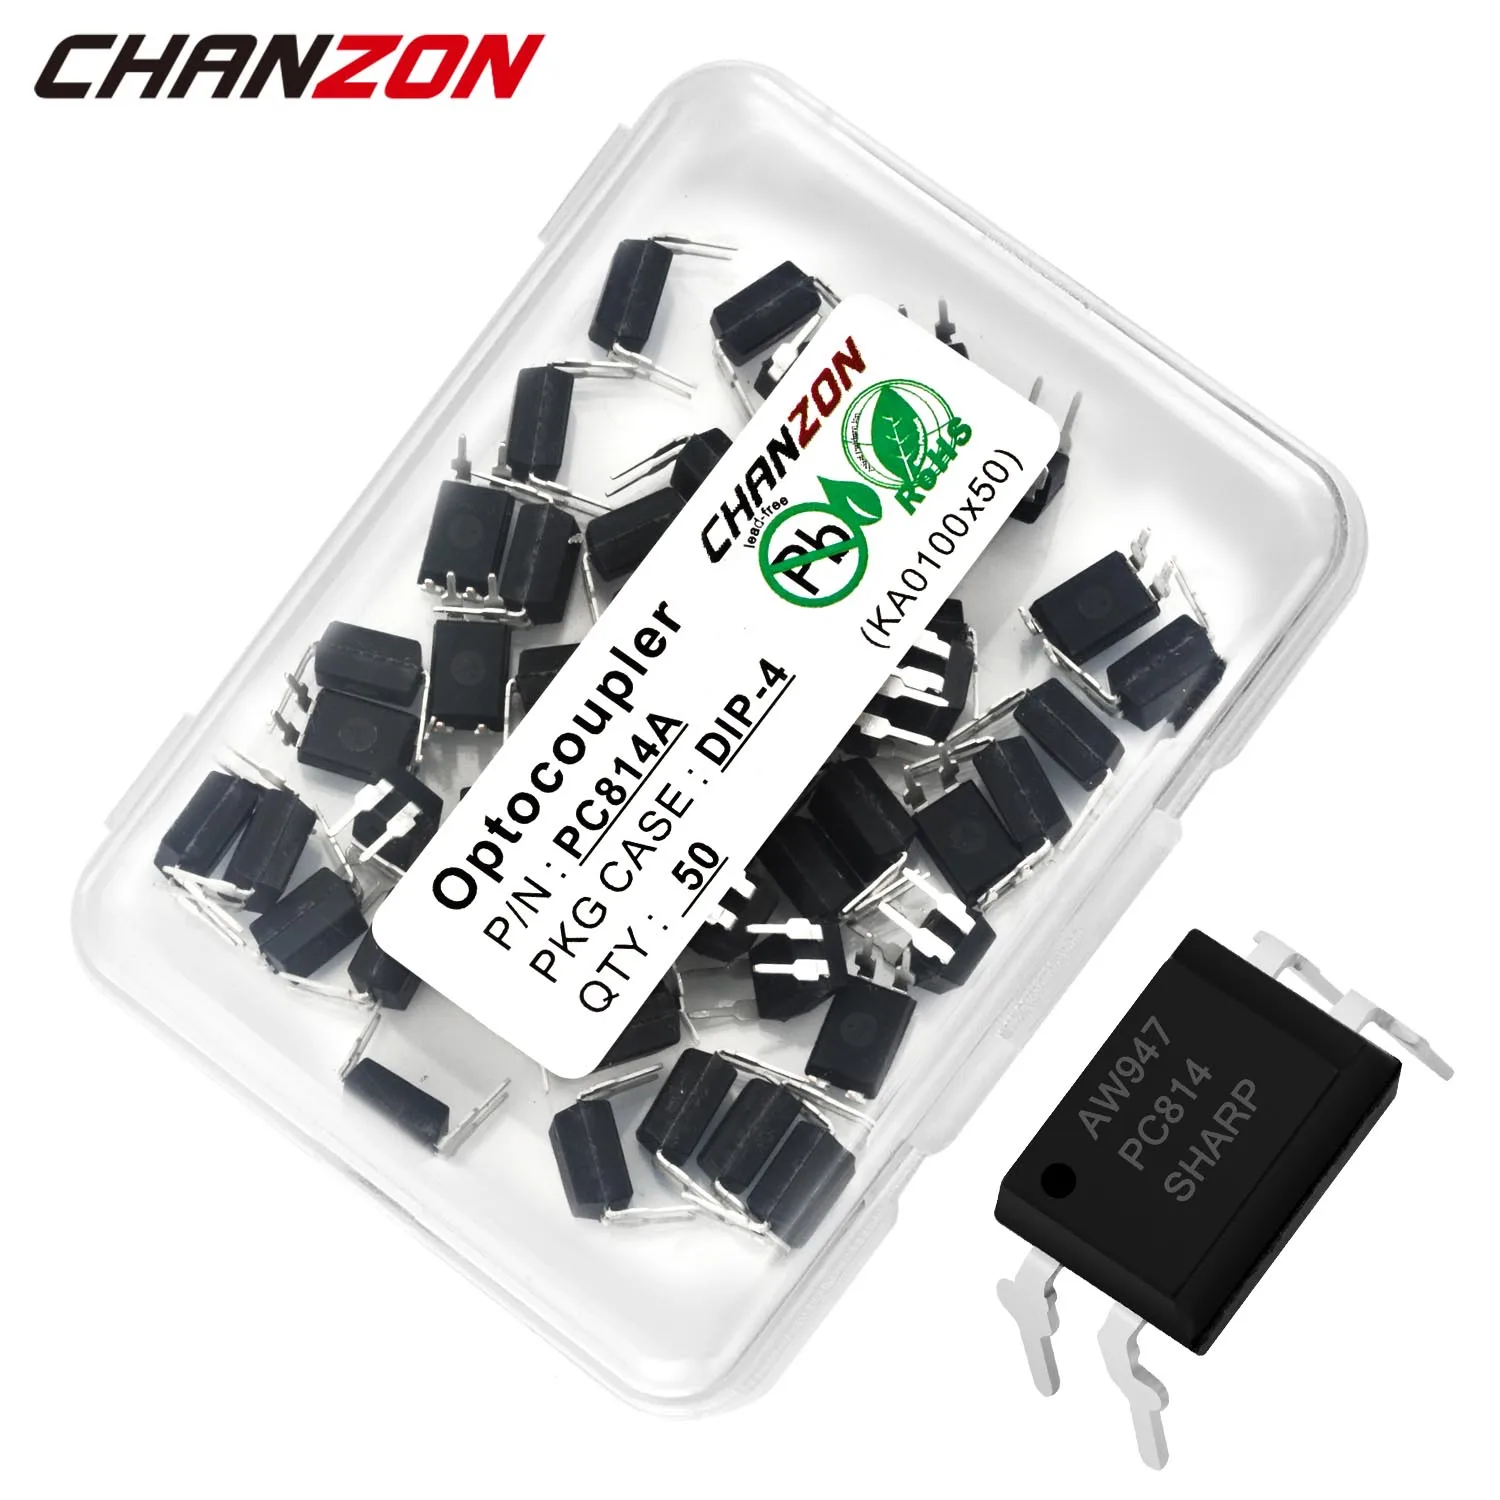 50PCS/LOT PC814A PC814 DIP4 DIP EL814A LTV814A  FOD814 Opto-isolator New and Original  IC In Stock Chanzon Free Shipping